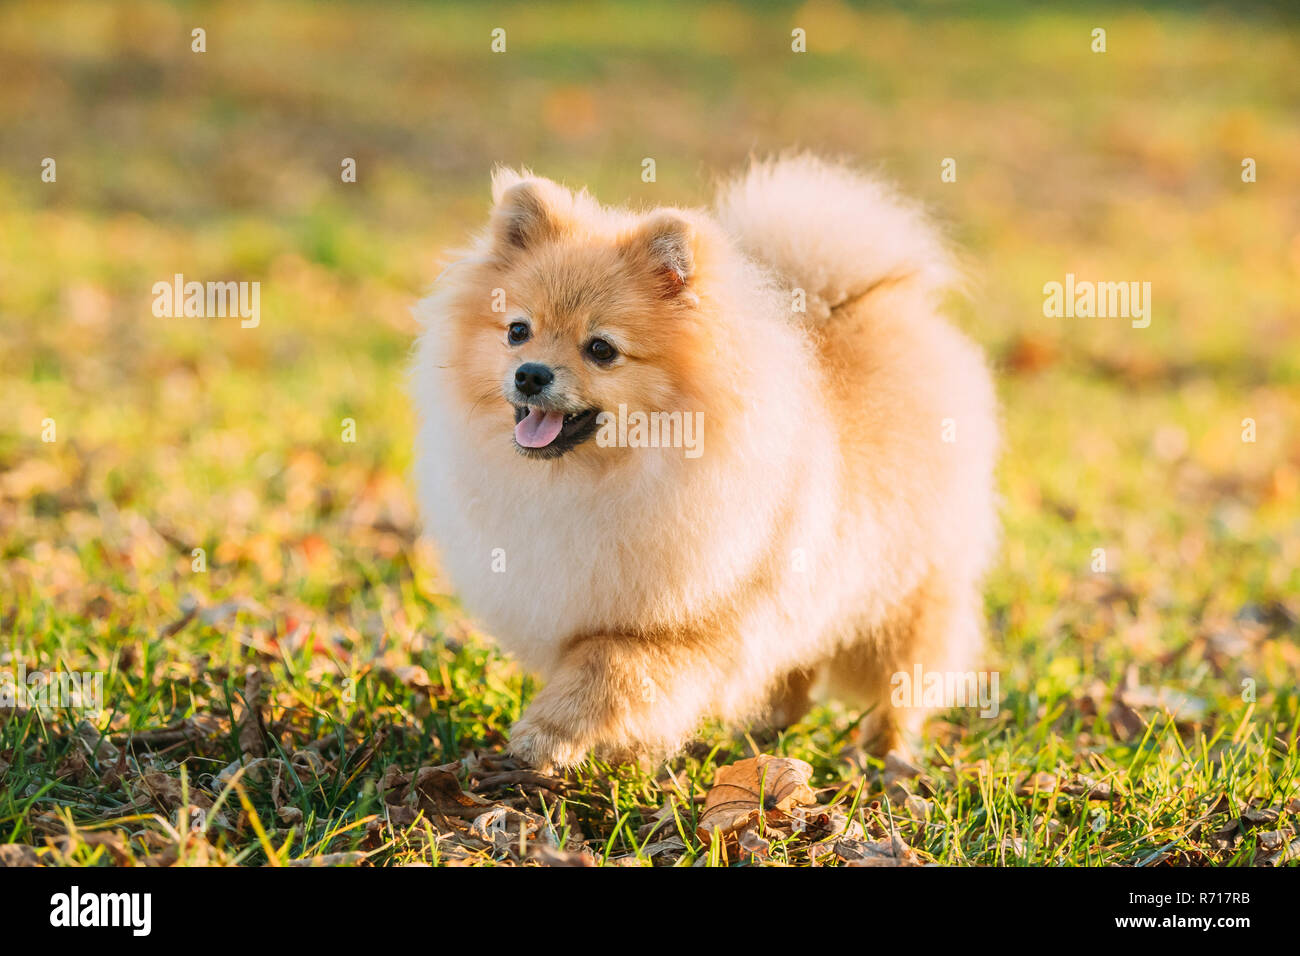 Funny Young Red Puppy Pomeranian Spitz Puppy Dog Happy Play Outdoor In Autumn Grass. Stock Photo